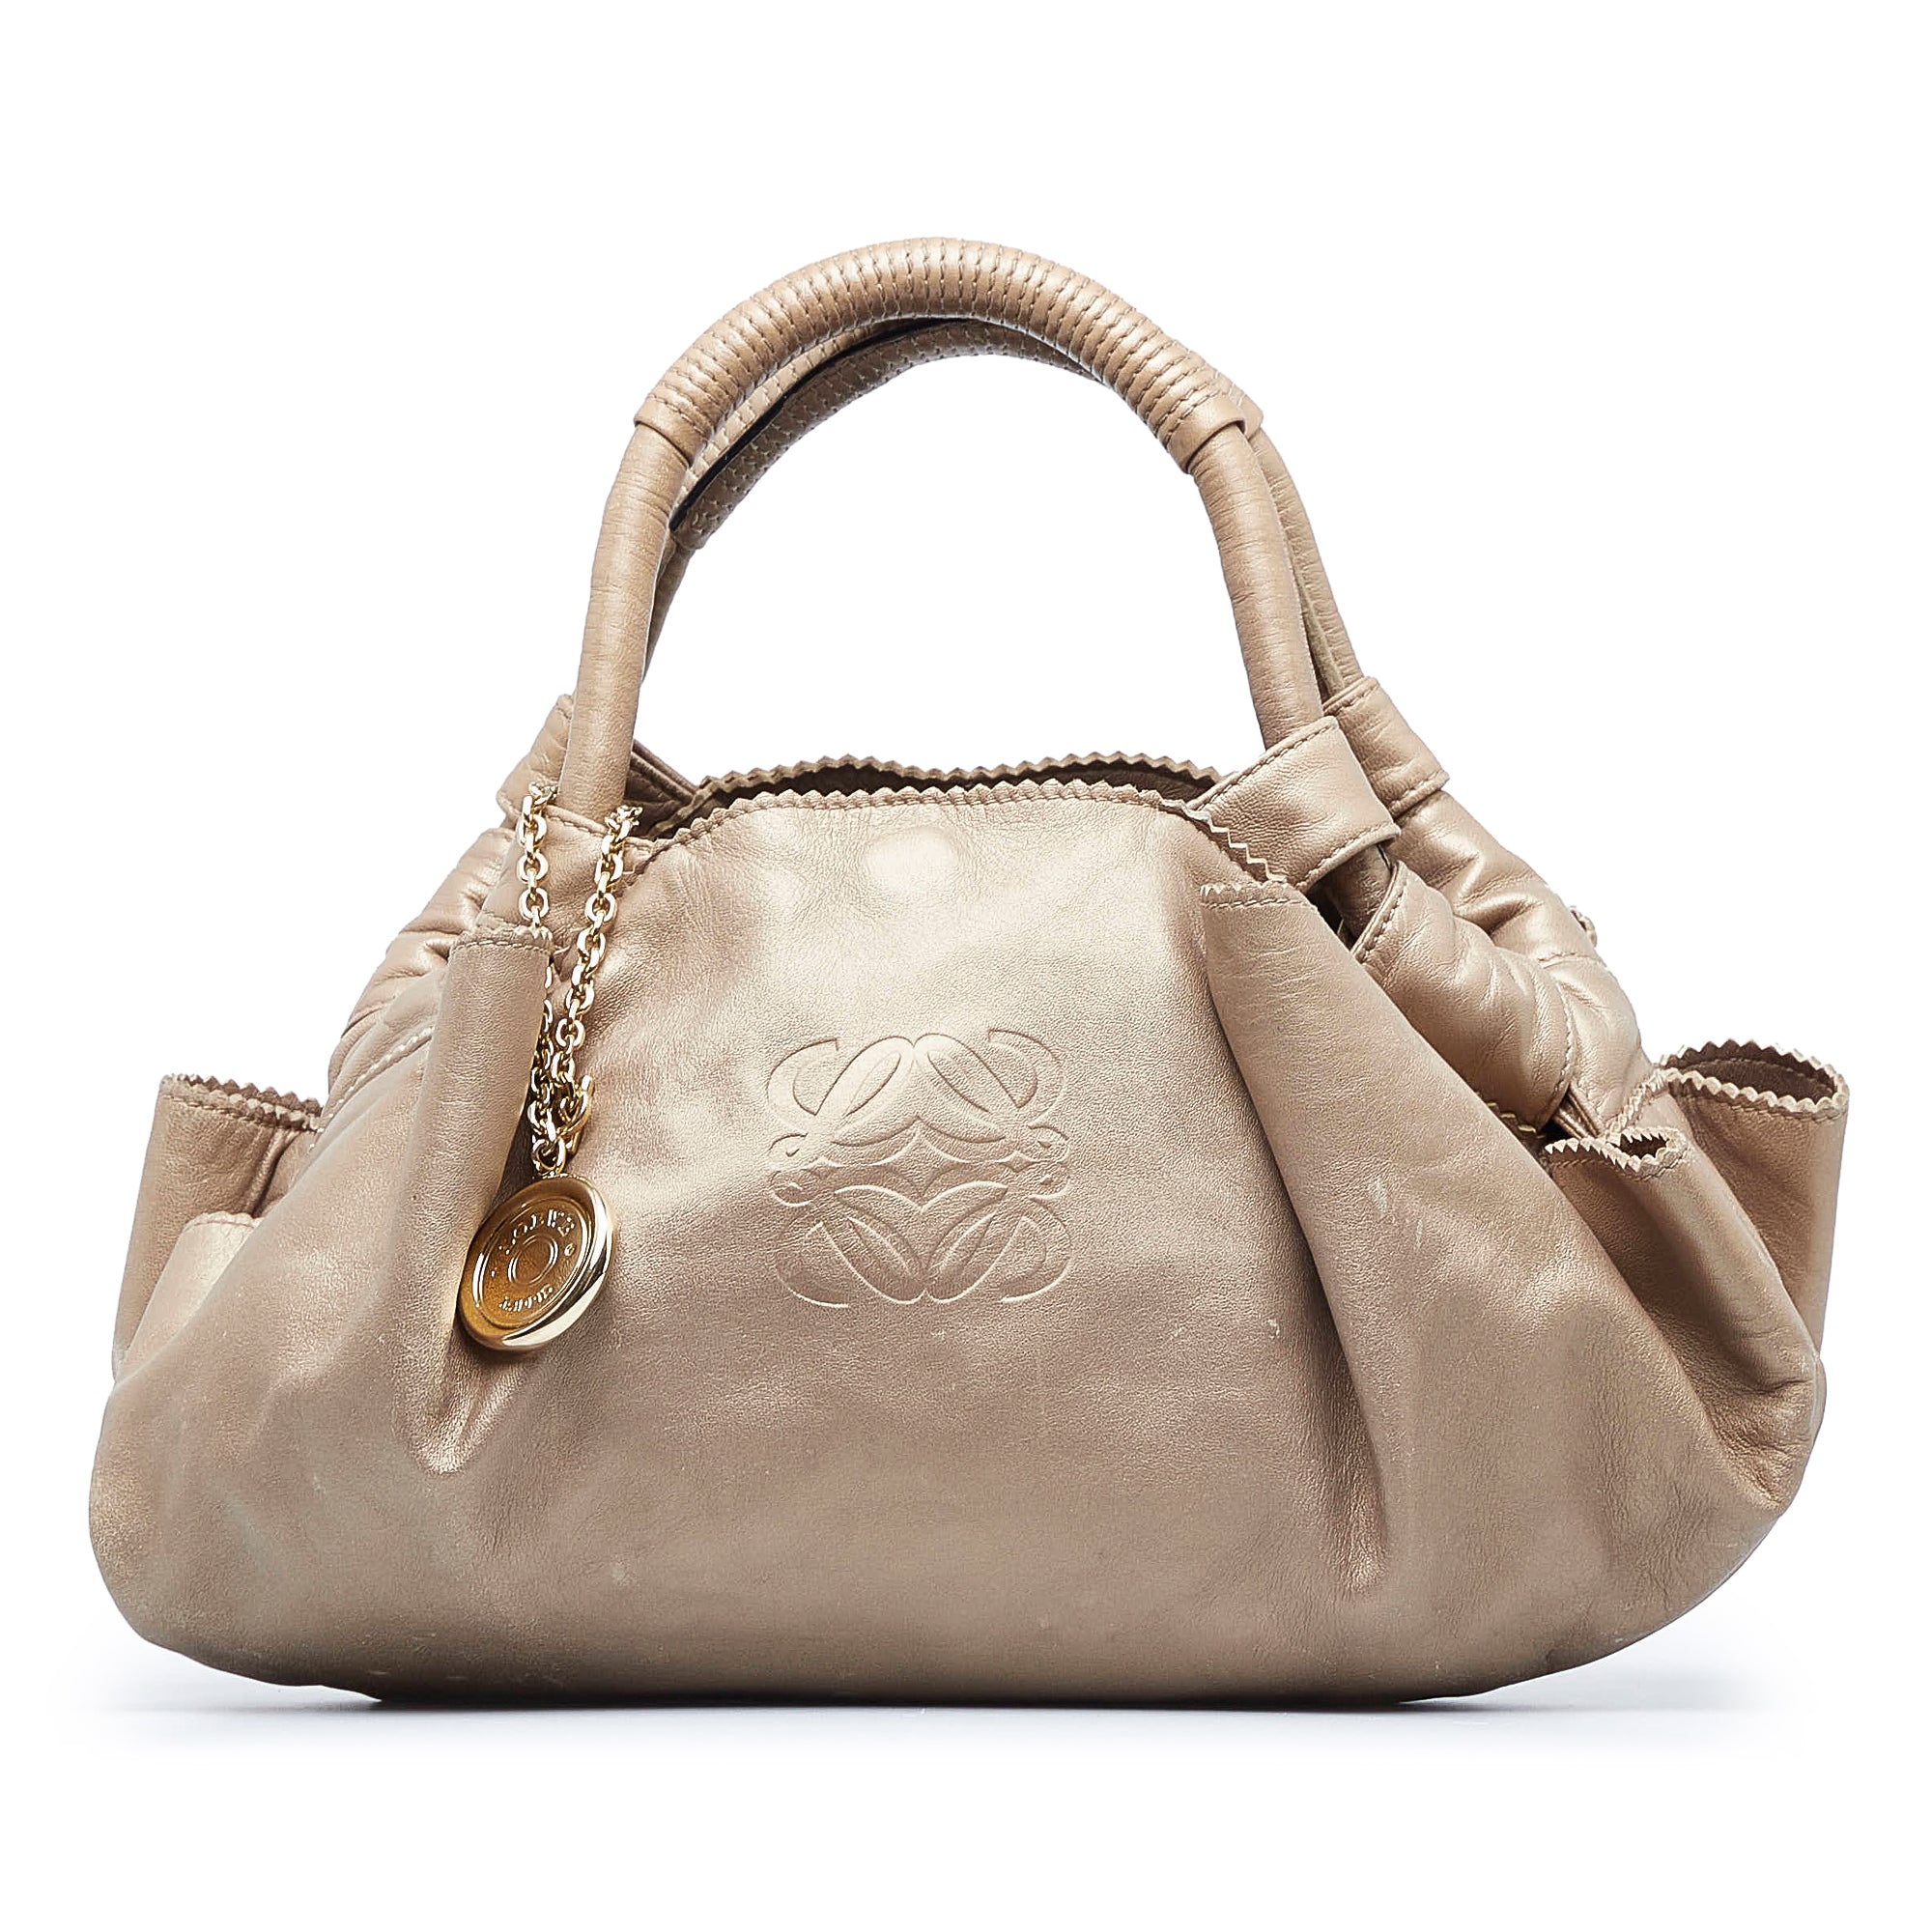 Introducing the Louis Vuitton Side Trunk Bag, RvceShops Revival